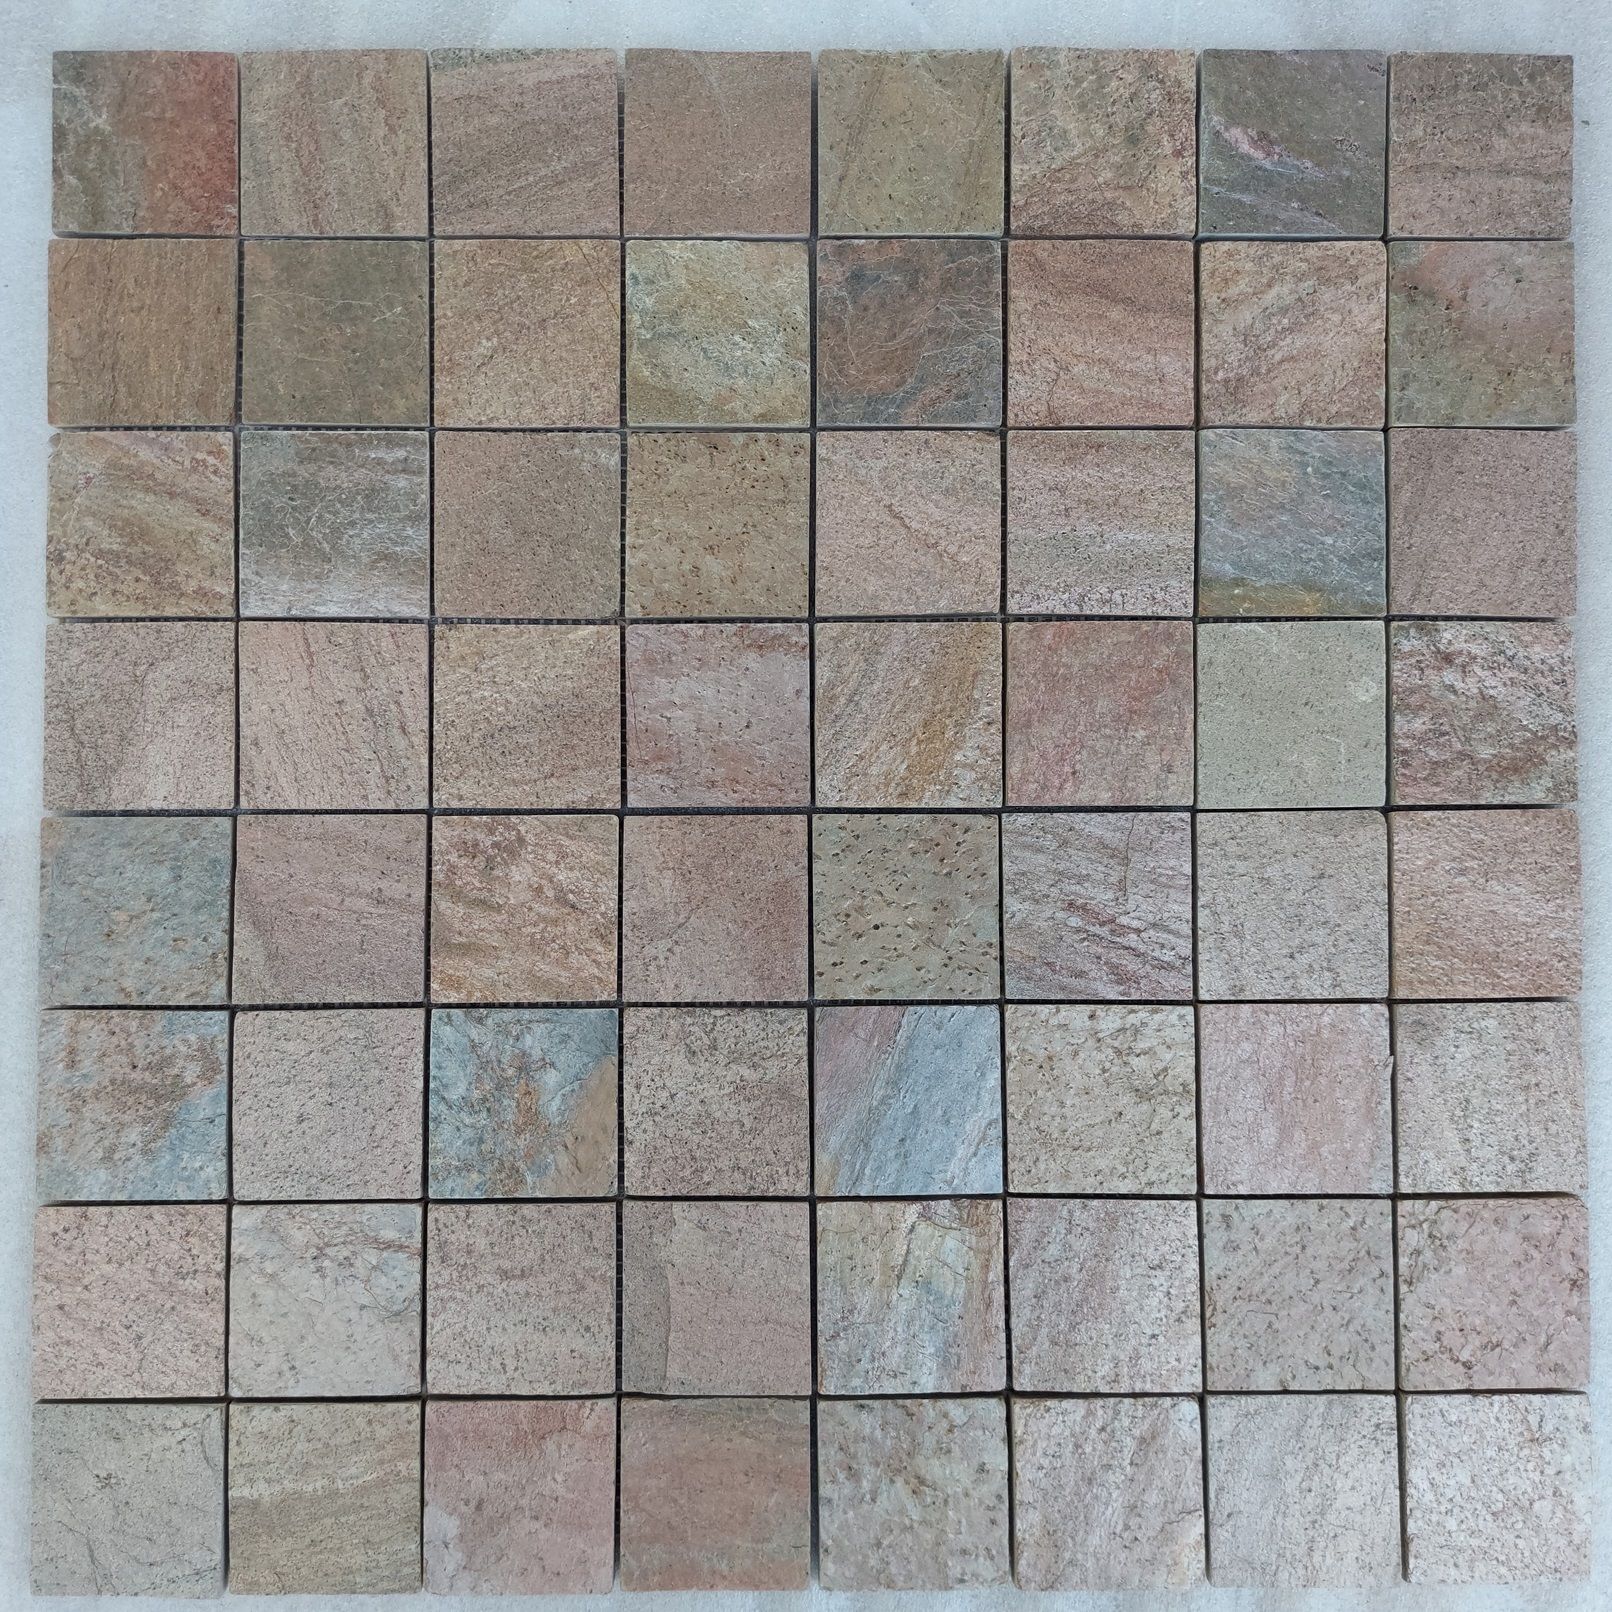 Hot Selling Natural Copper Slate Mosaic Tiles for Kitchen Bathroom Swimming Pool